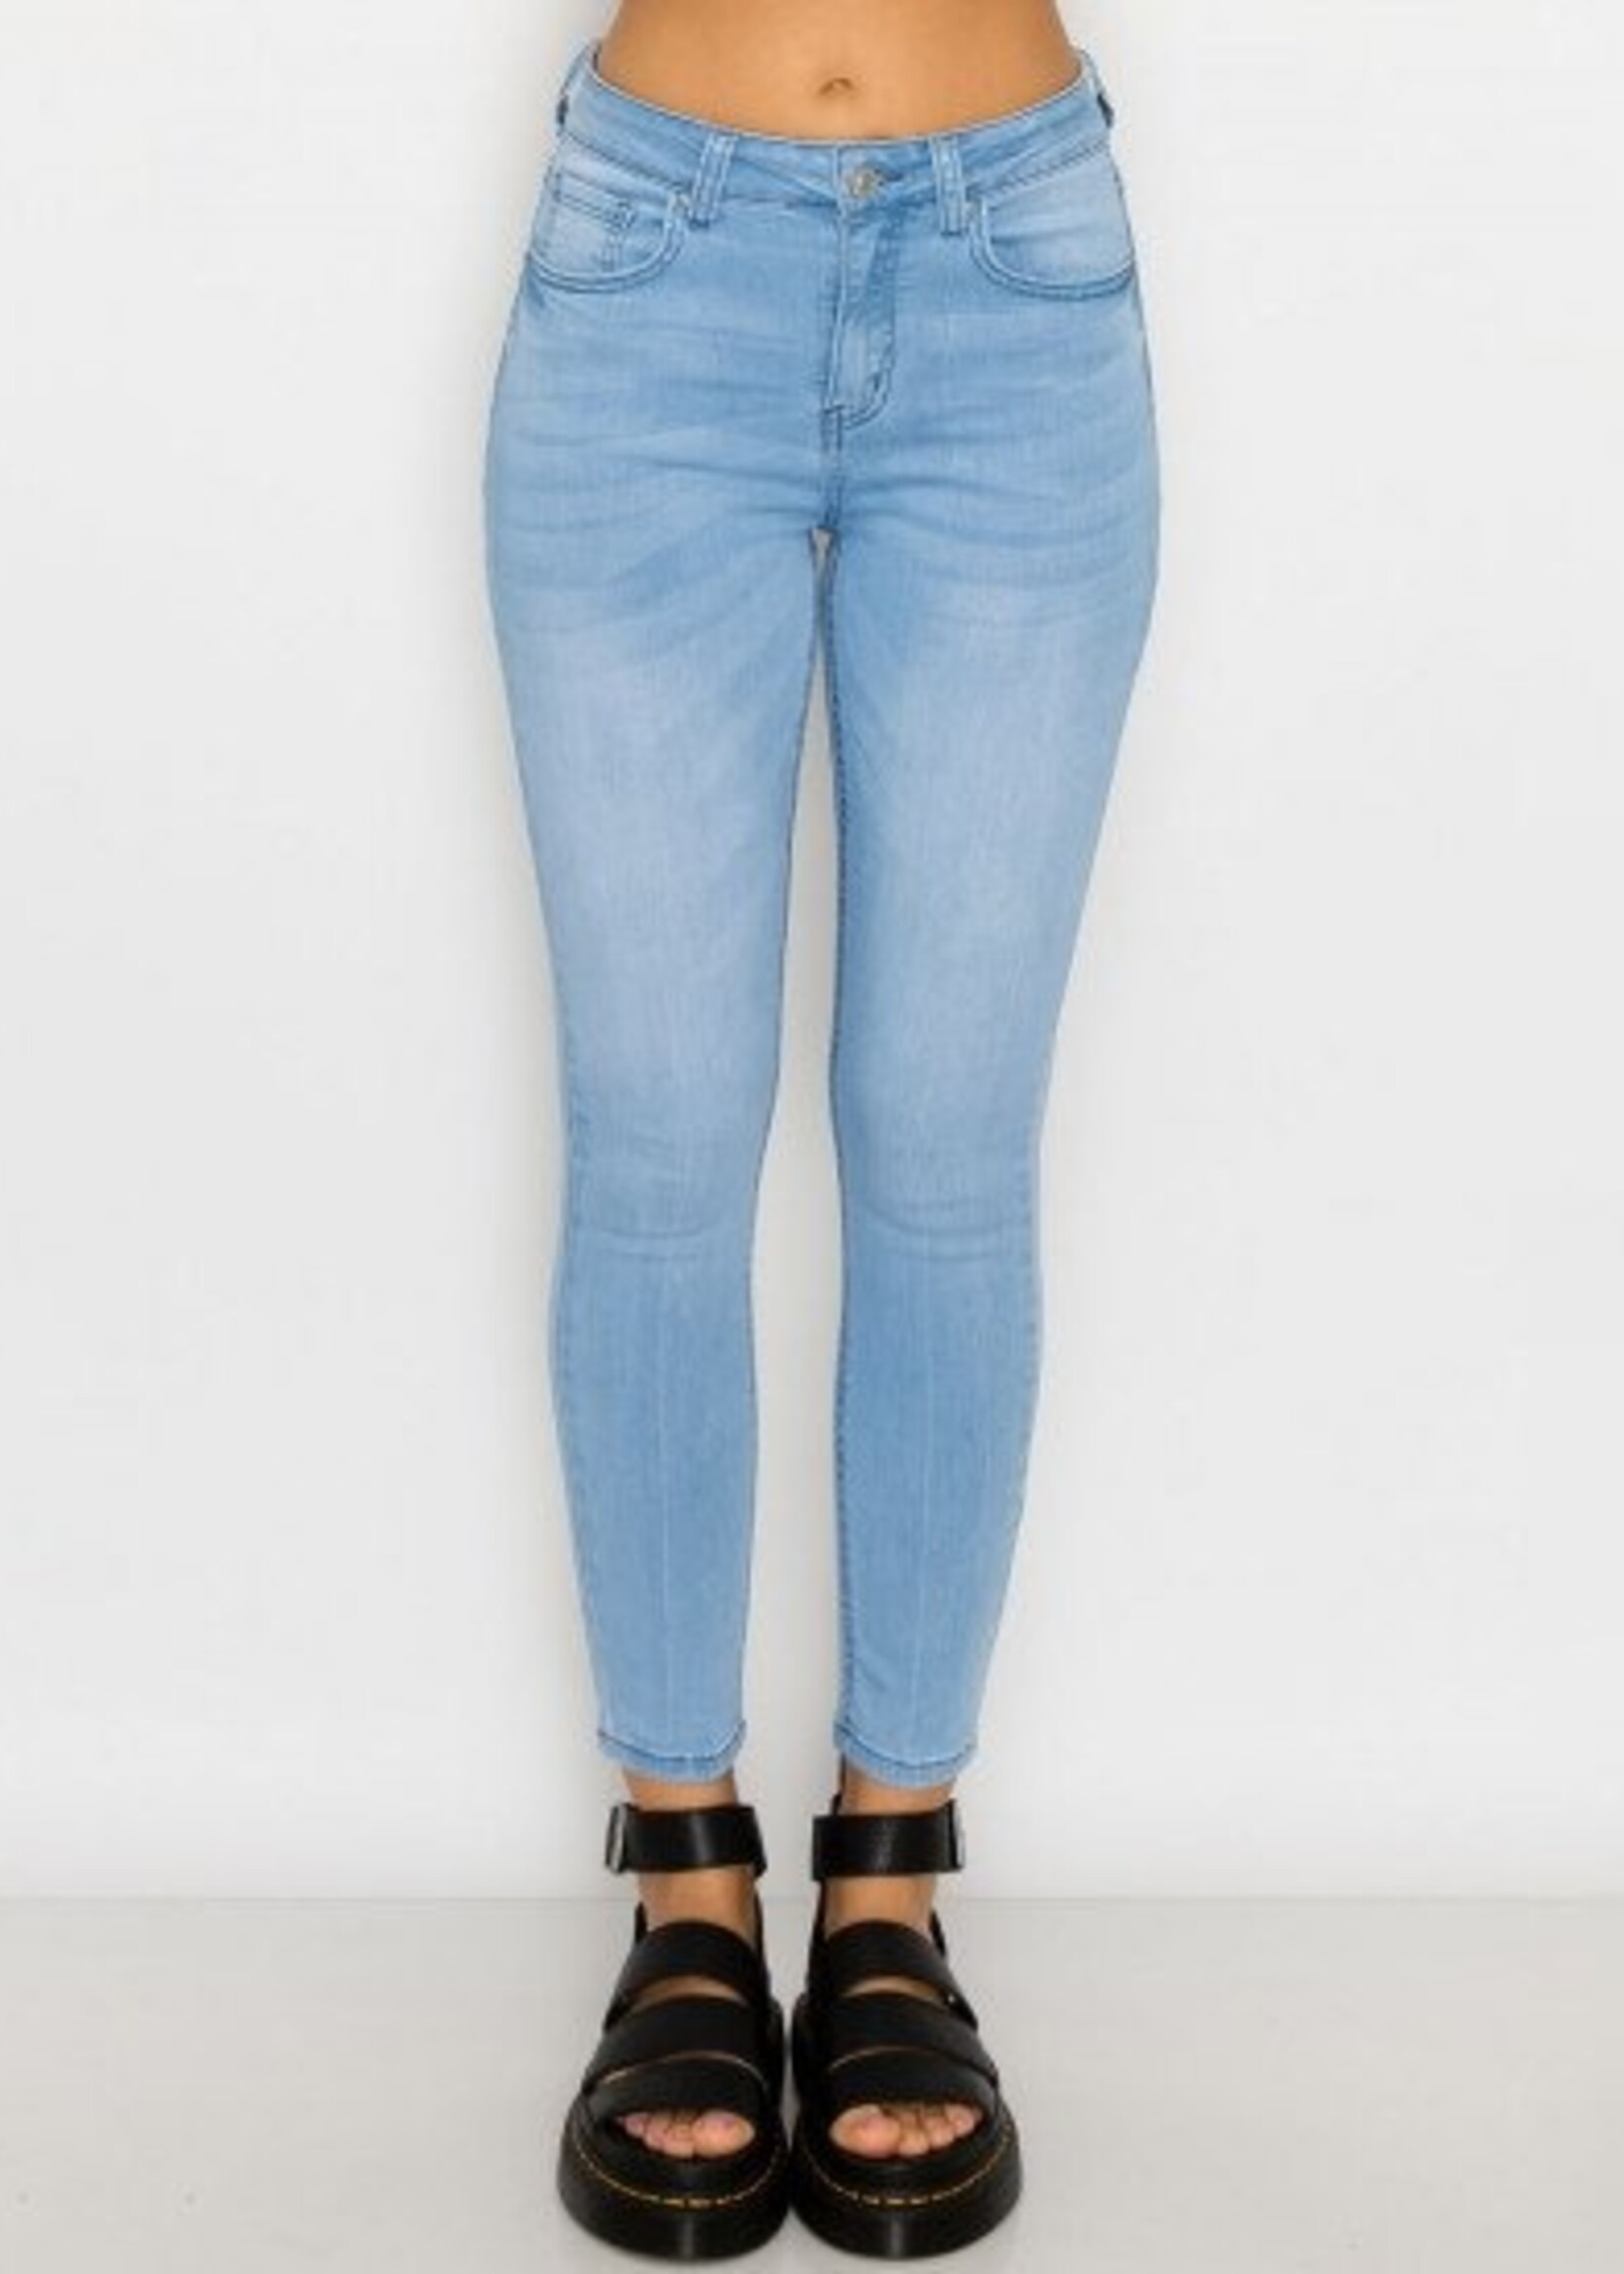 Wax Jeans Wax Jeans - Authentic High Waisted Basic Skinny - 90284